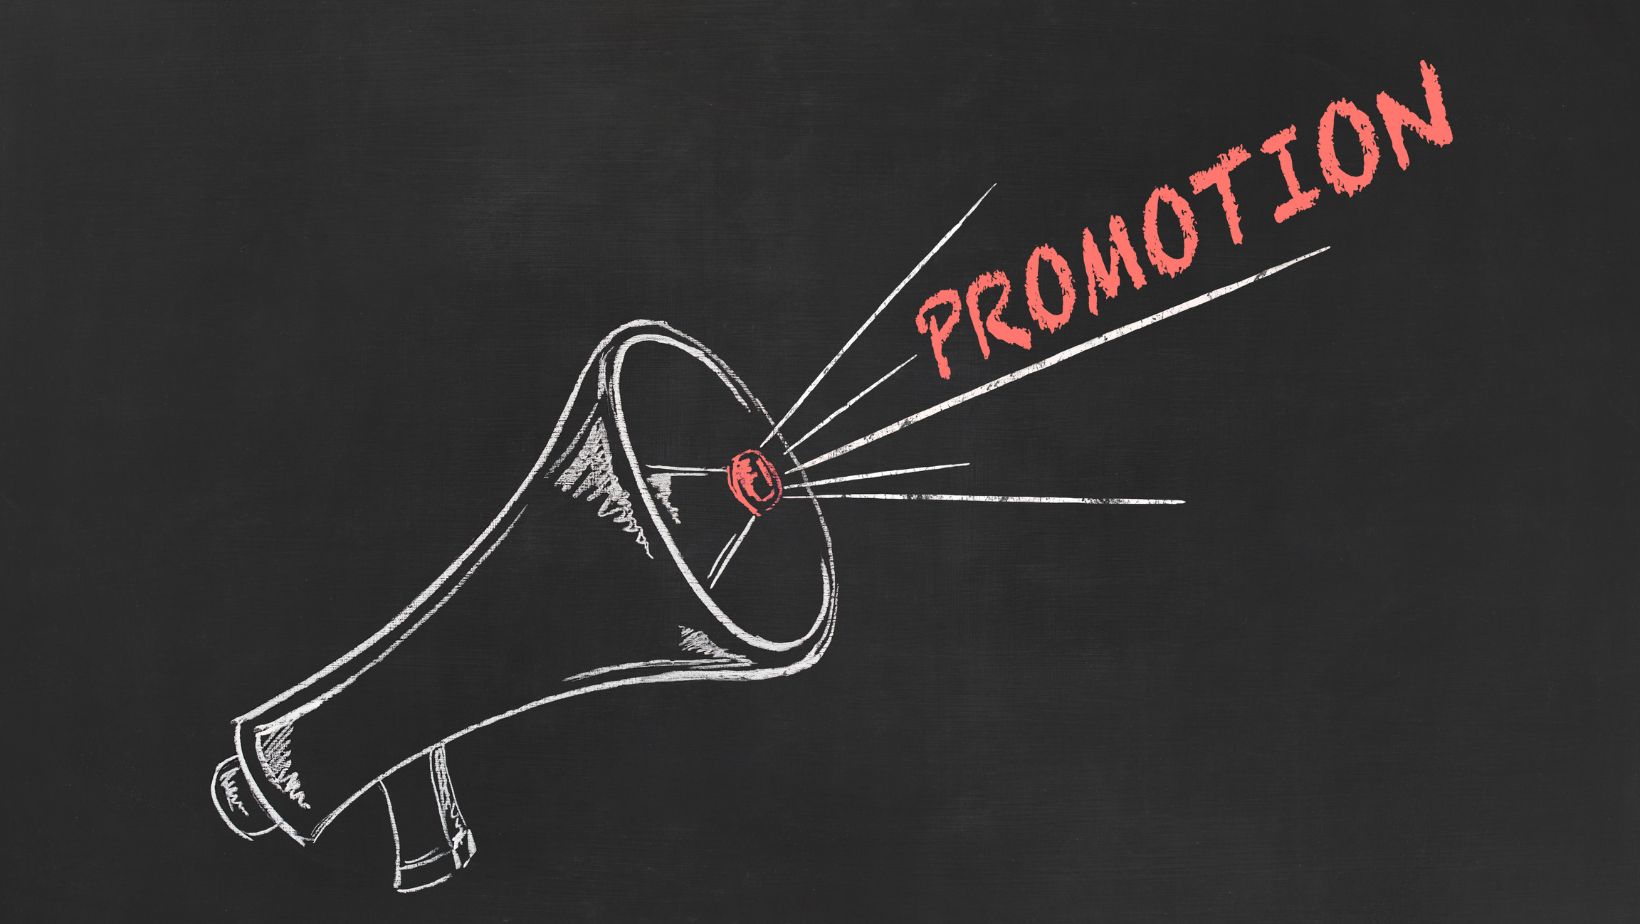 b2b sales promotion can use several techniques such as